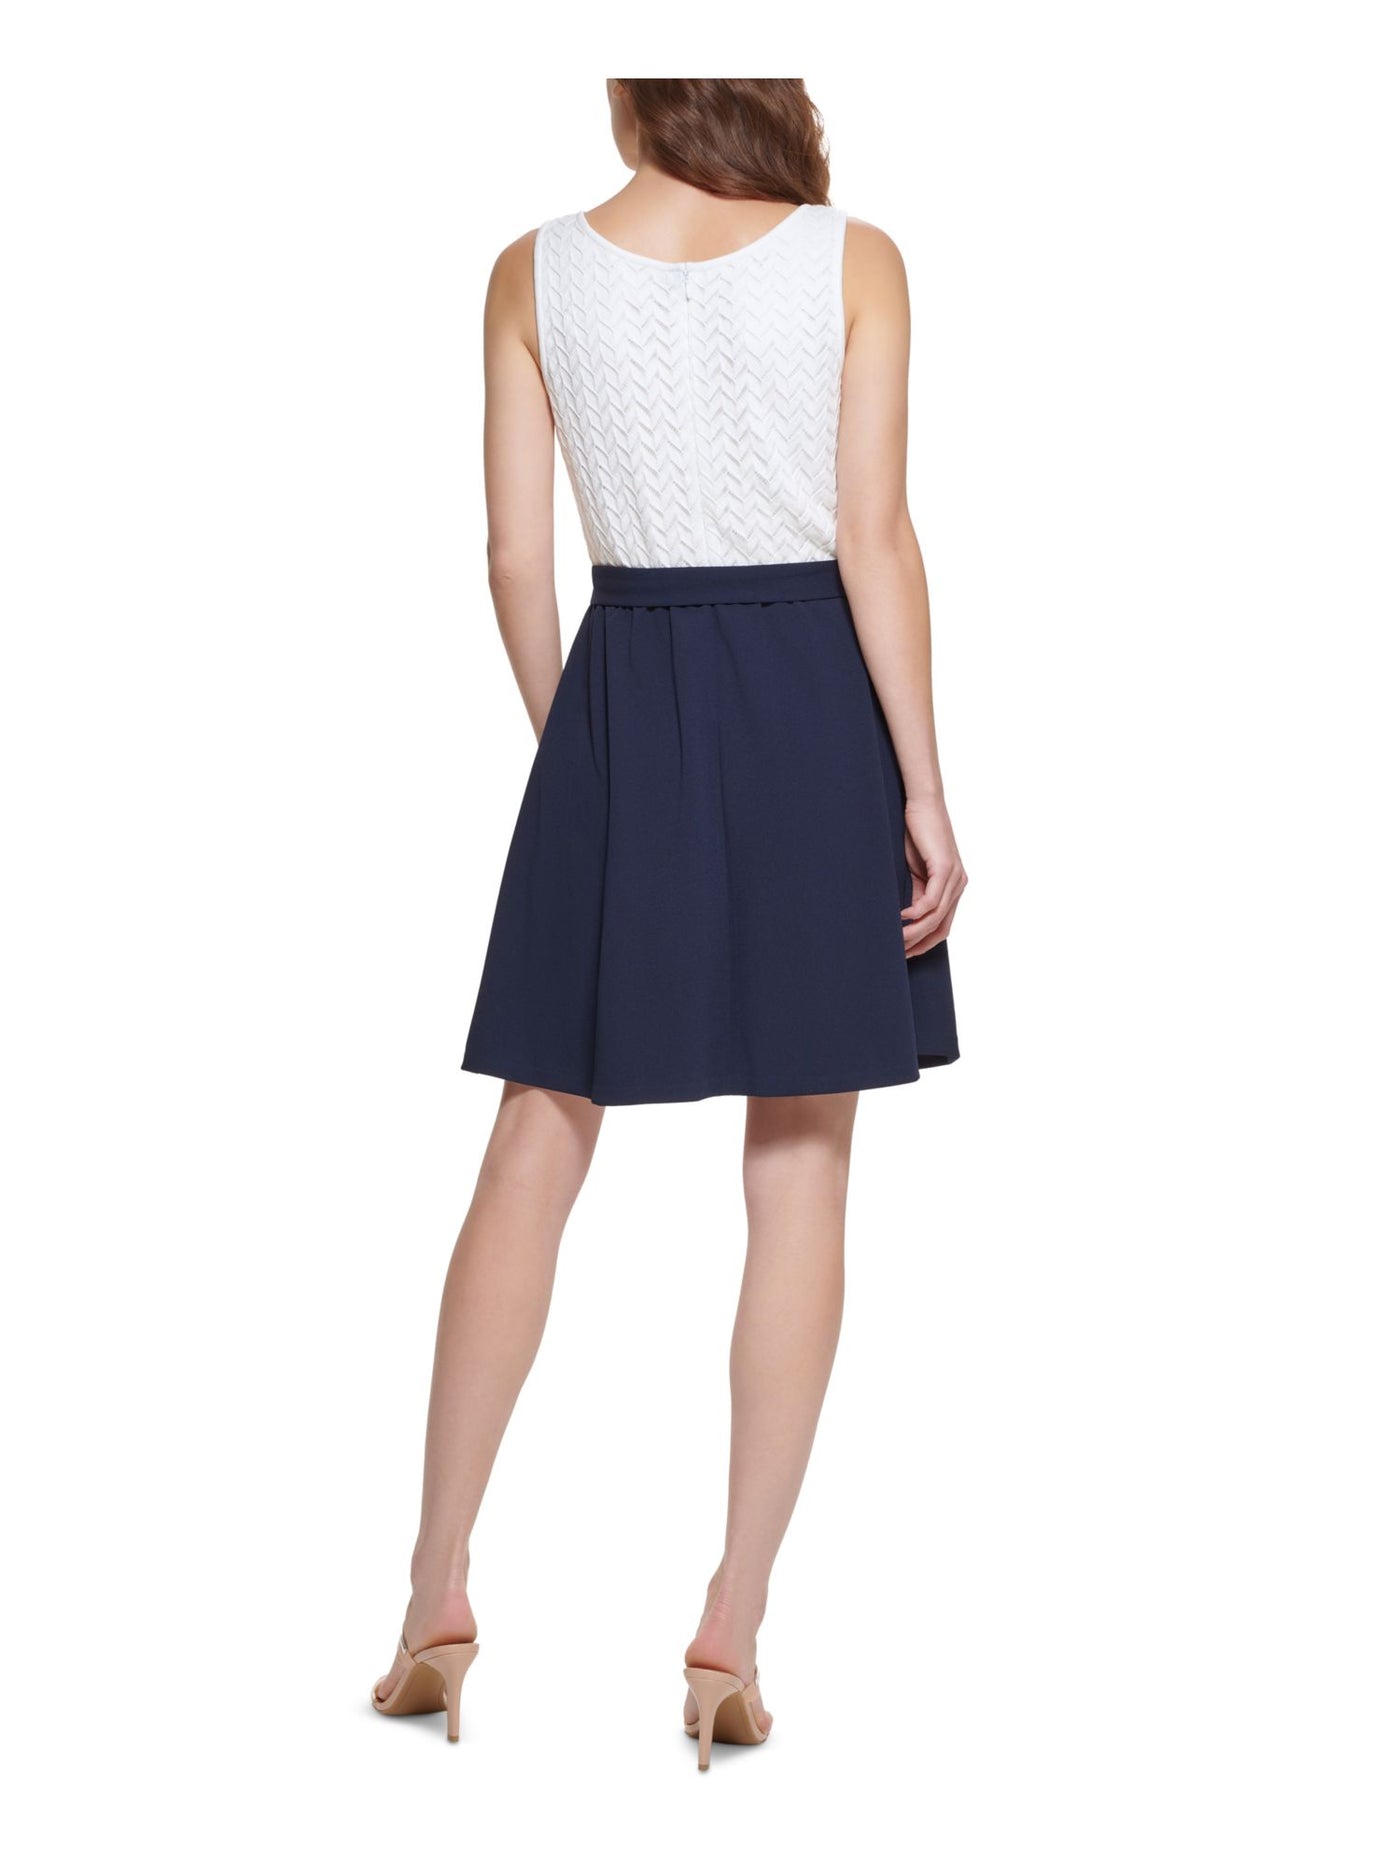 DKNY Womens White Zippered Tie Partially Lined Color Block Sleeveless Round Neck Above The Knee Fit + Flare Dress 12